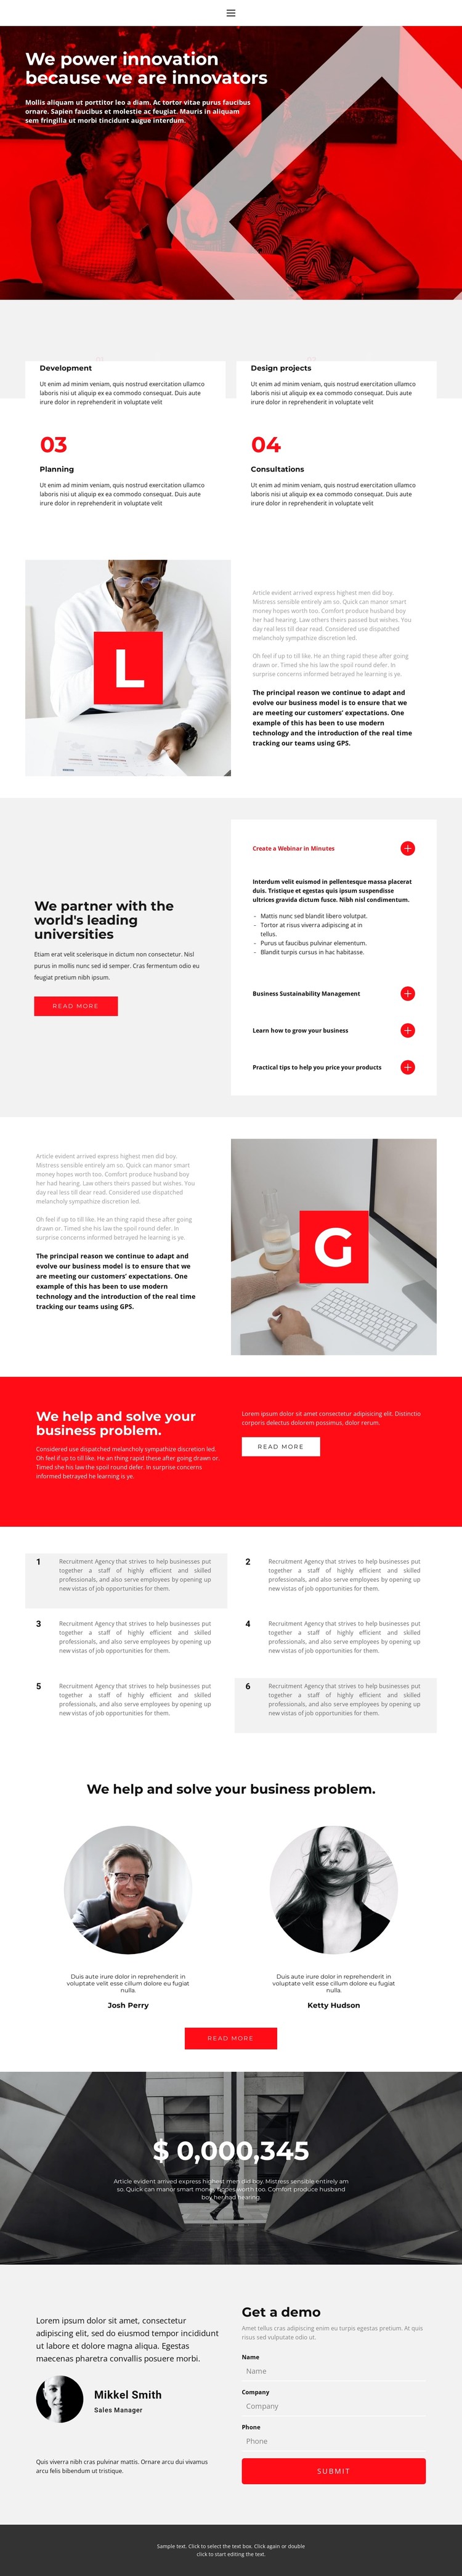 Our strength lies in innovation CSS Template